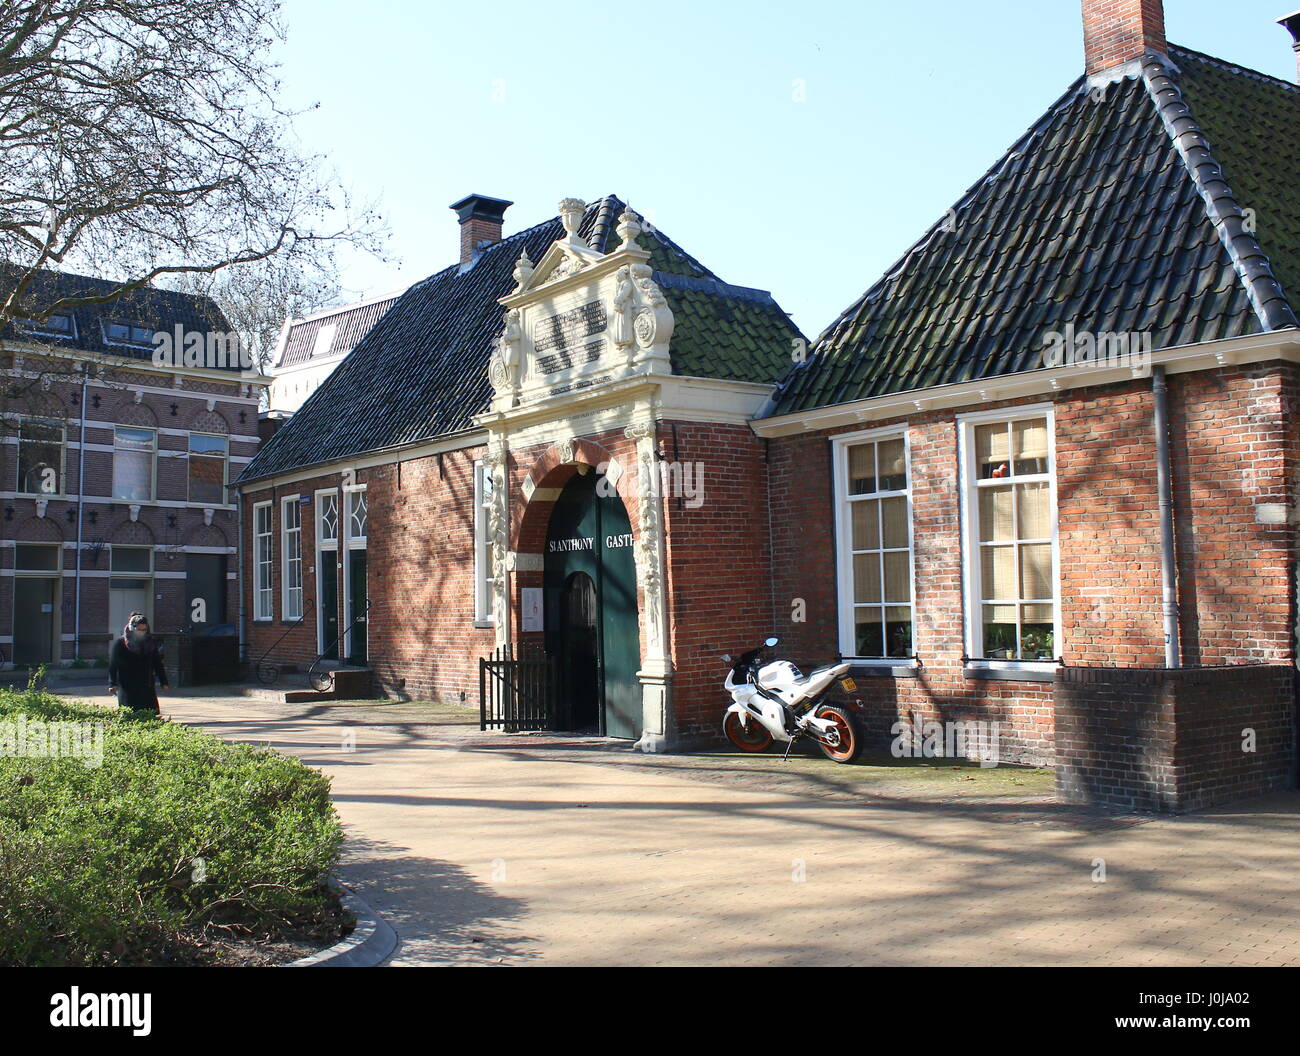 Entrance to Sint Anthonygasthuis (Saint Antony's Hofje = courtyard with Almshouses), inner city of Groningen, Netherlands. Founded in 1517. Stock Photo